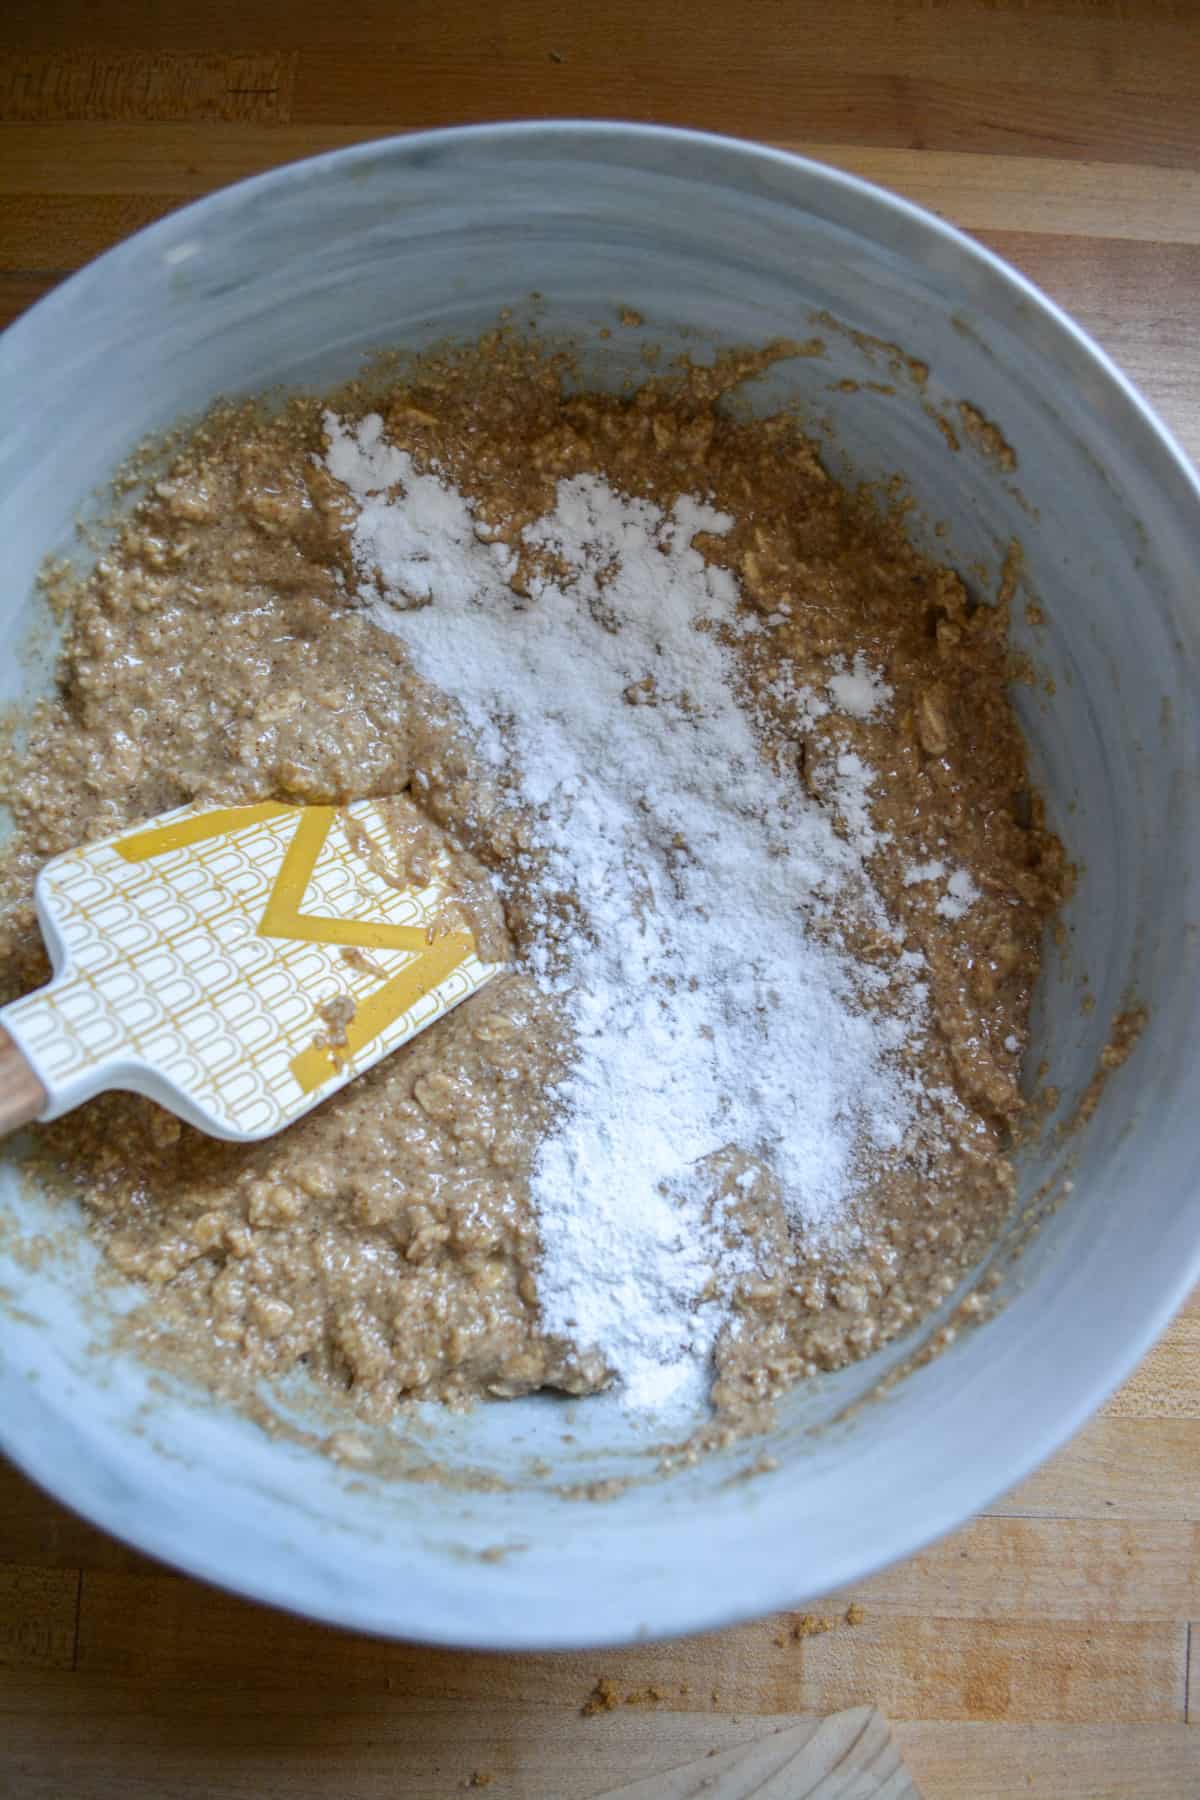 Leaveners added into the batter in a mixing bowl.